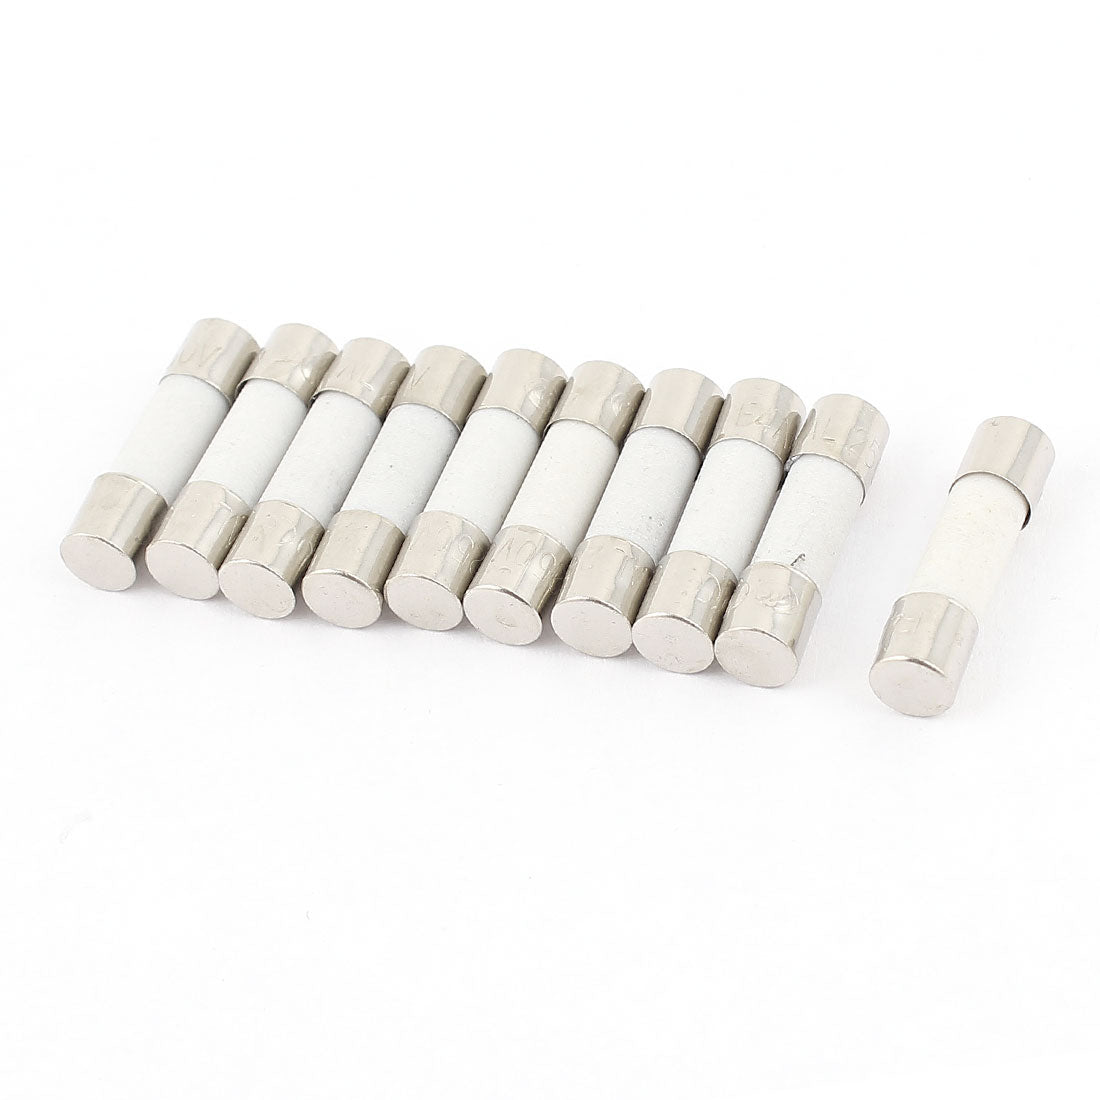 uxcell Uxcell 10 Pcs 250V 250mA Fast Blow Ceramic Fuse Tube 5mm x 20mm